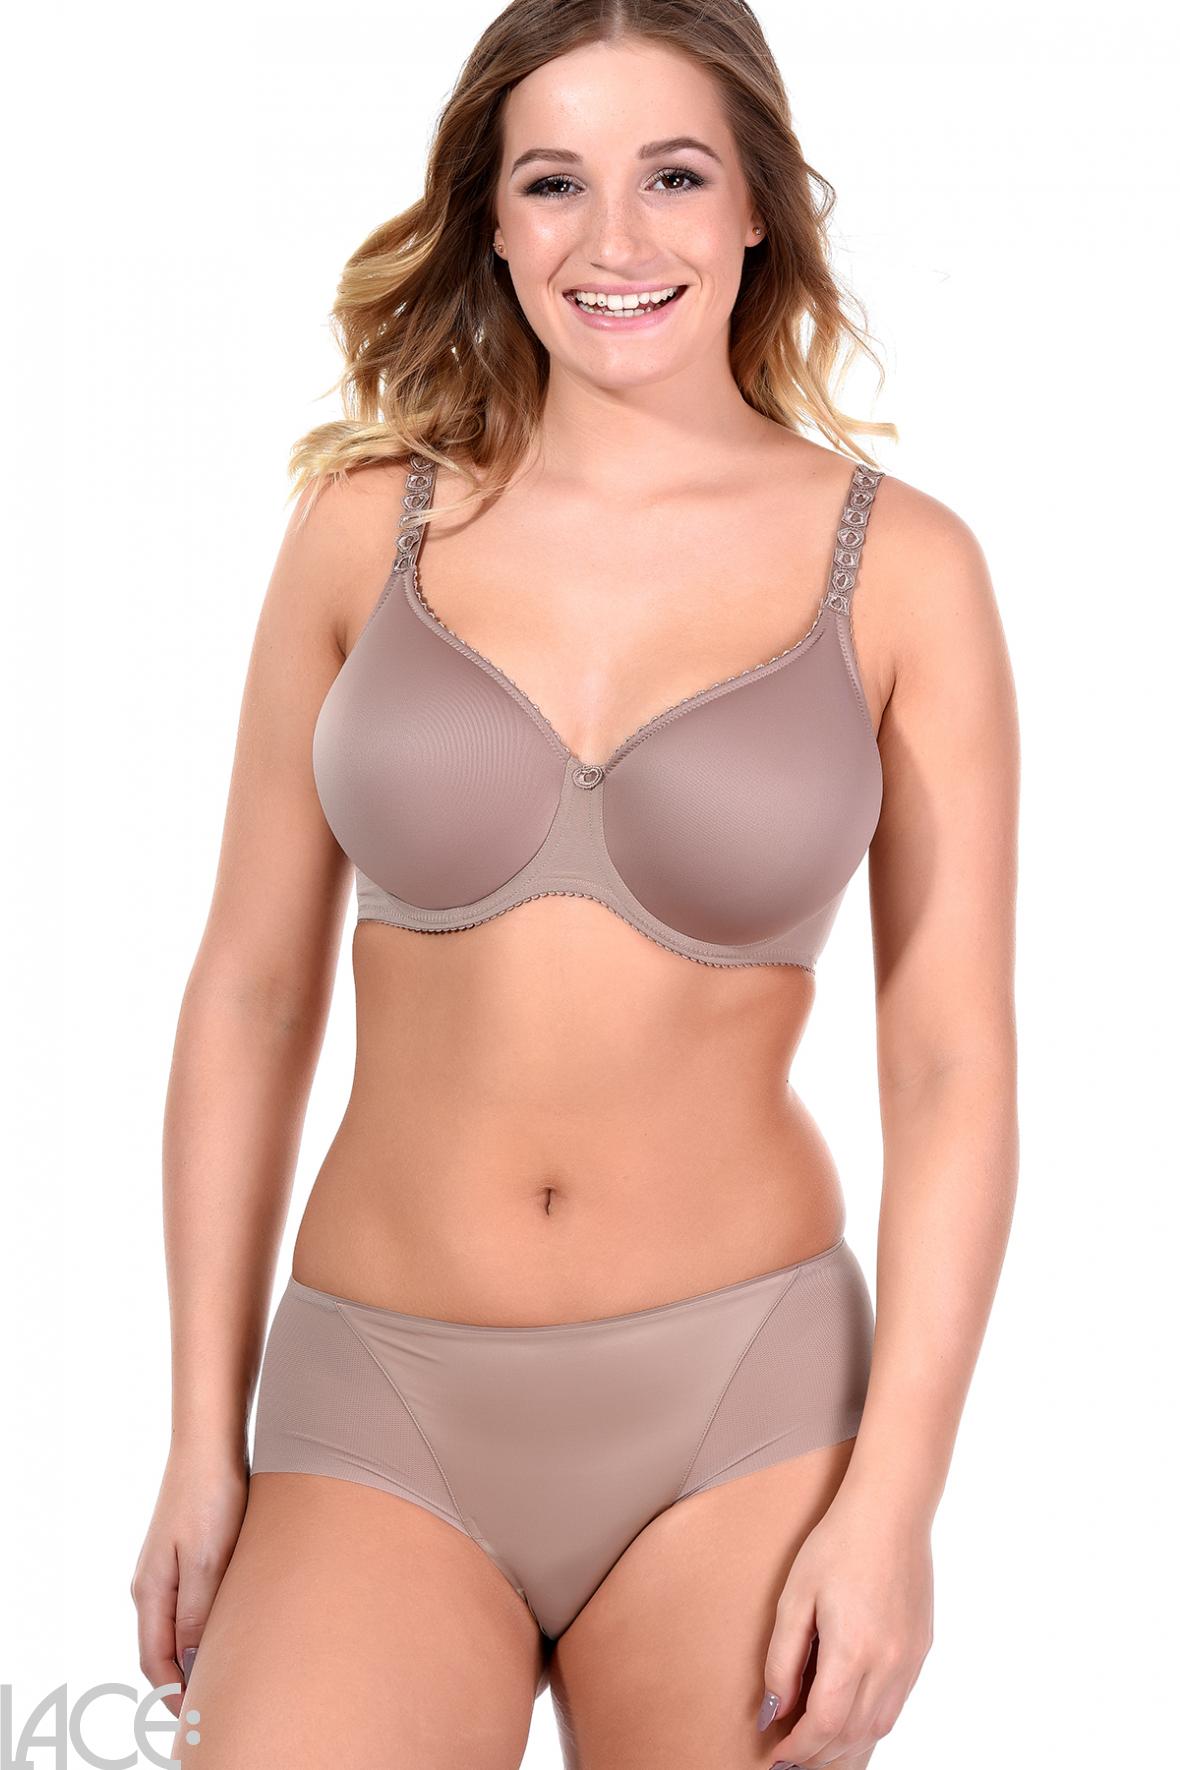 Every Women Must Have the L Cup Bra - Ivamm